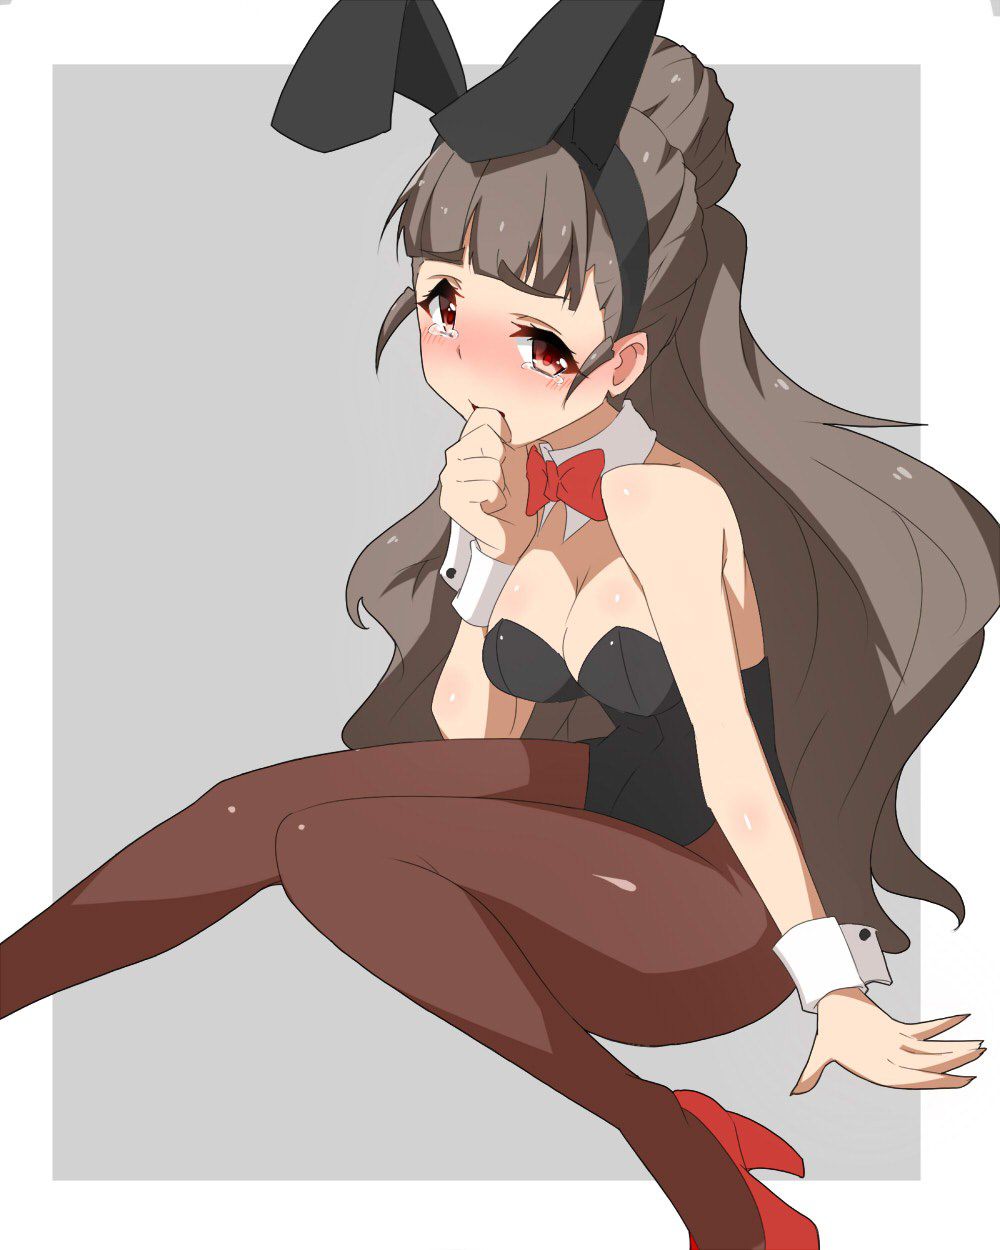 It was life that I wanted to keep a girl in a cute bunny girl costume ... Two-dimensional erotic image that seems to be 7